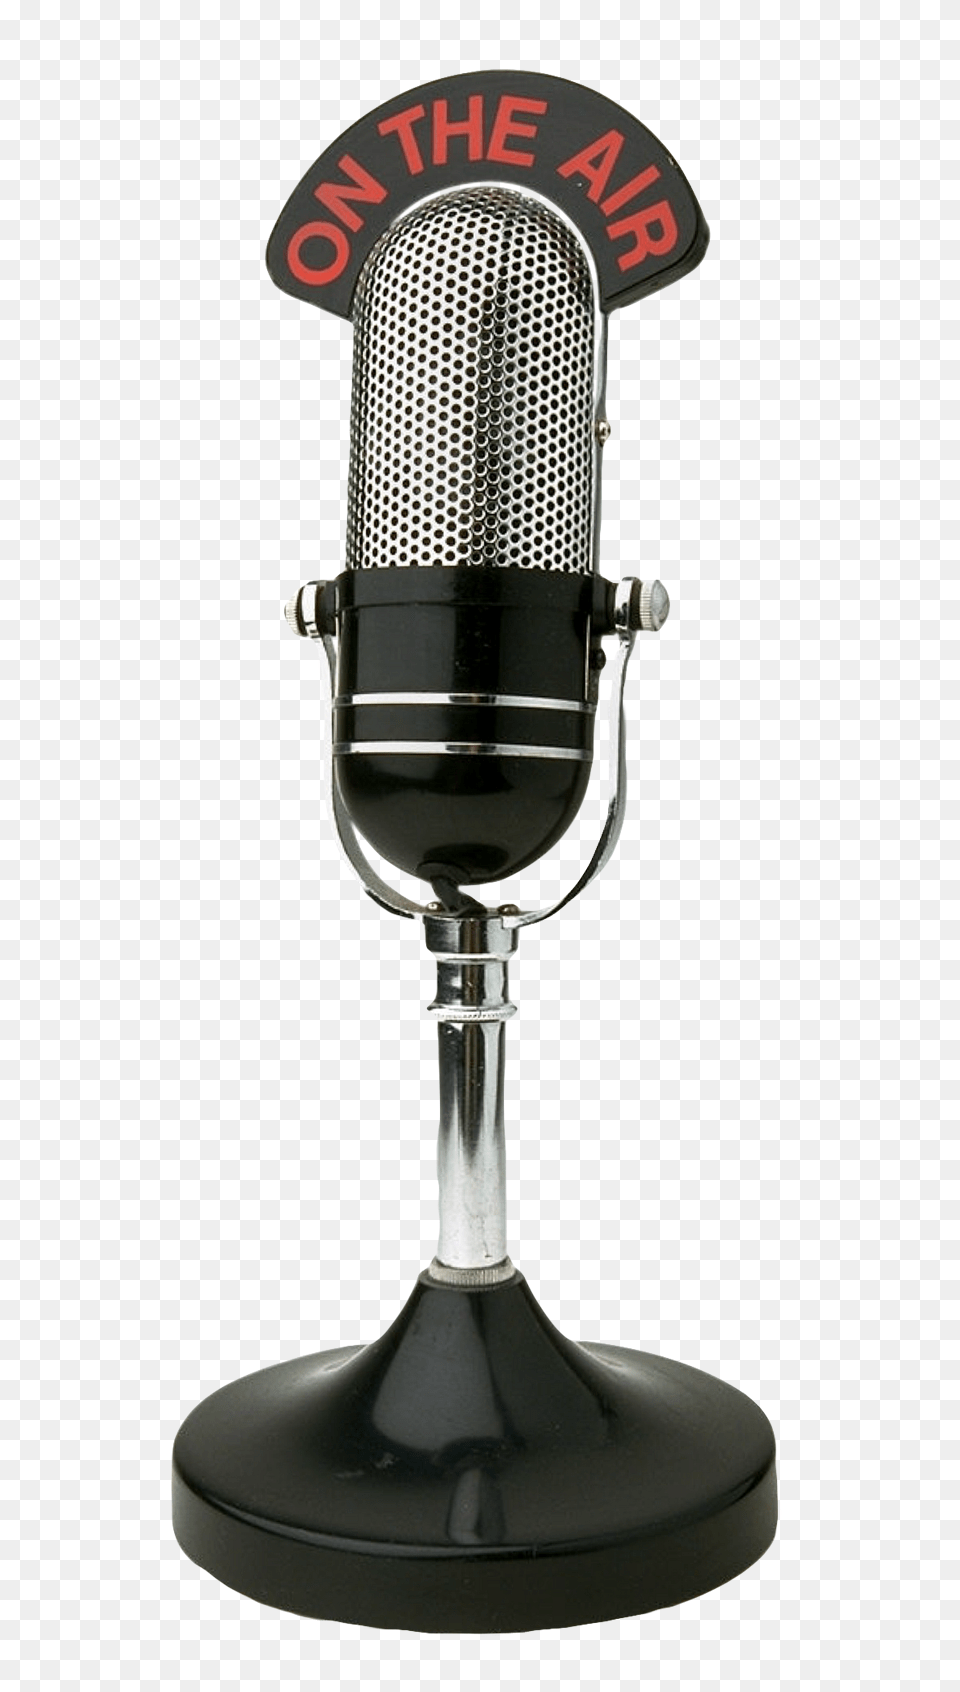 Download Free Microphone Transparent Dlpngcom Radio Mic, Electrical Device Png